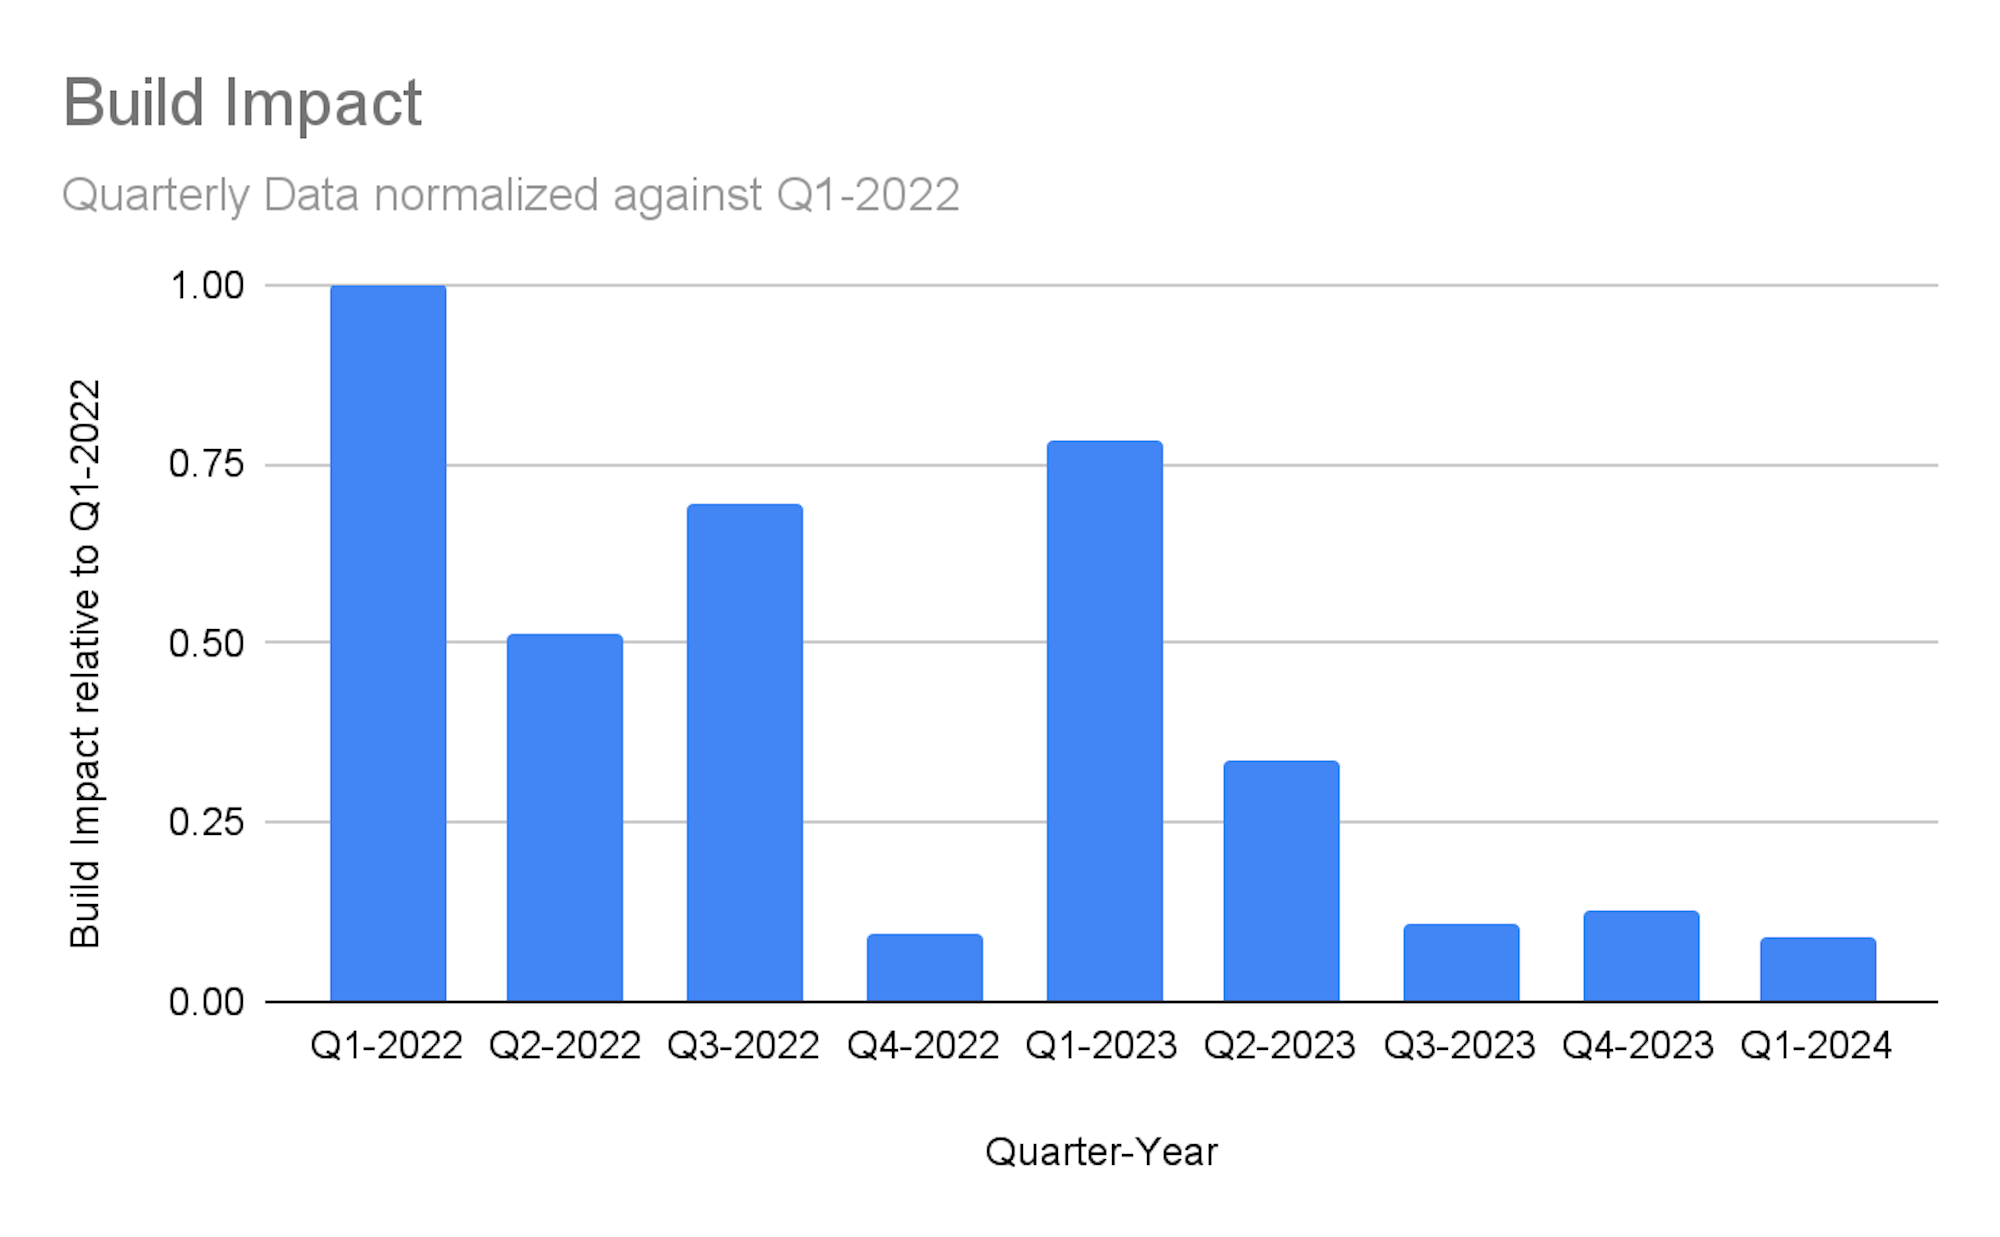 Two-year quarterly build impact data